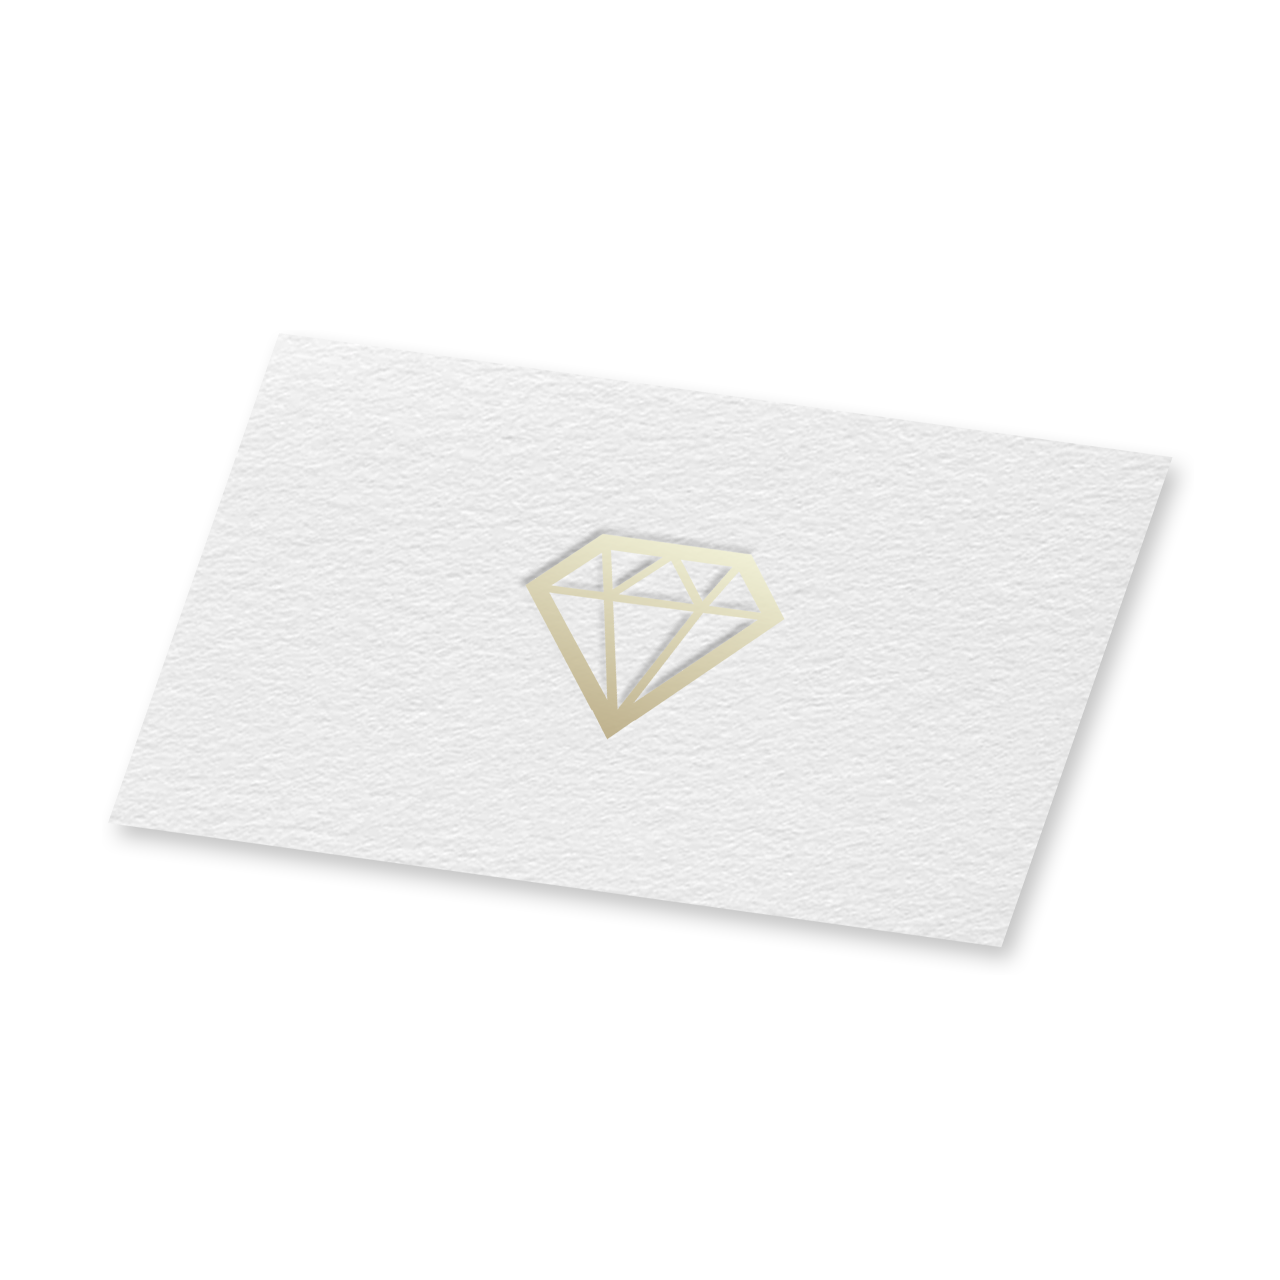 Diamonds Angels business cards collection | MASTROiNCHIOSTRO